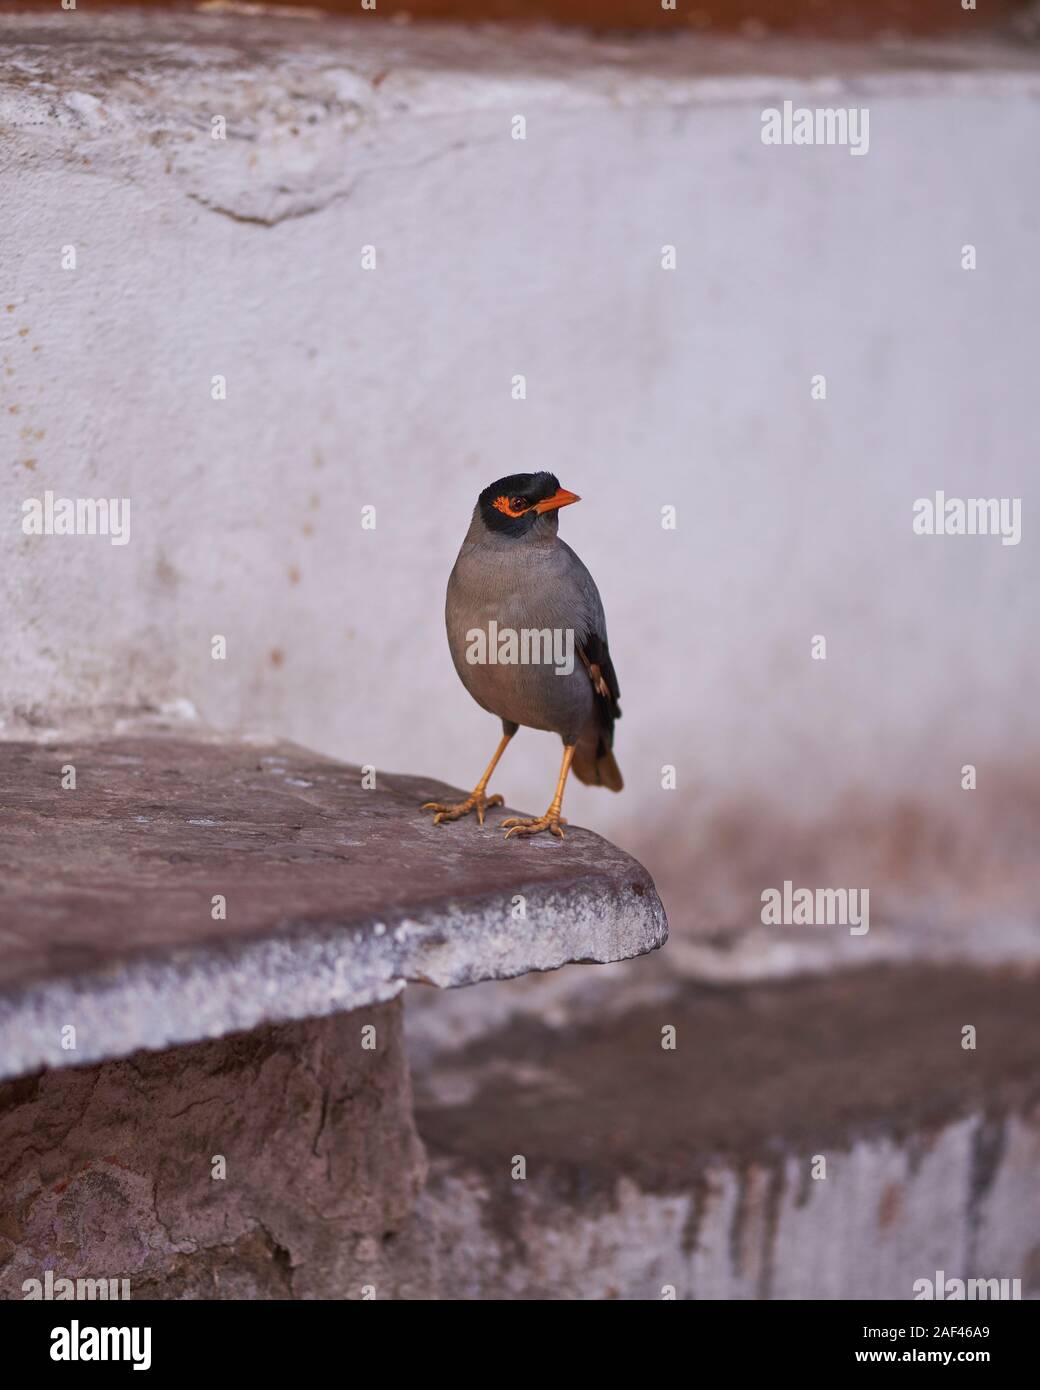 A myna perched on a wal in Pushkar Stock Photo